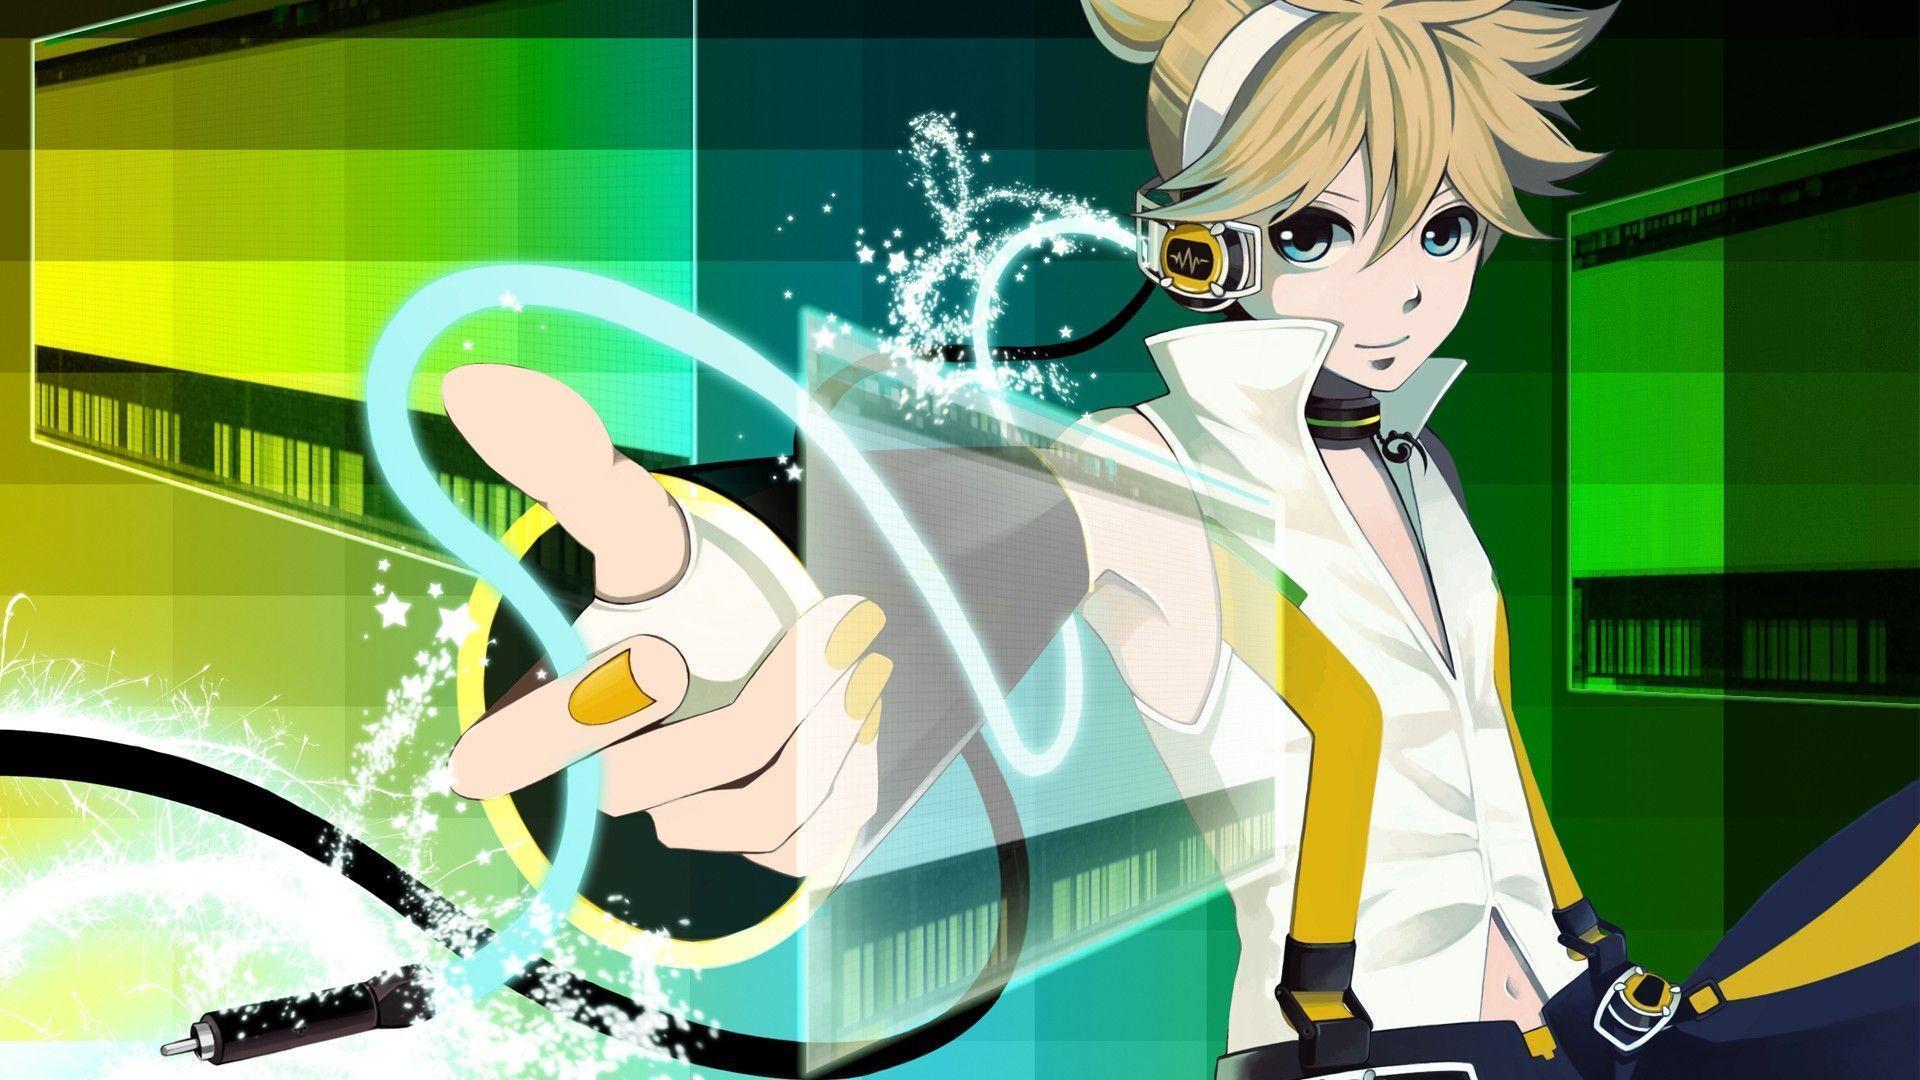 A blond man with goggles and a white coat points his finger, which glows blue and shoots a beam of light. - 